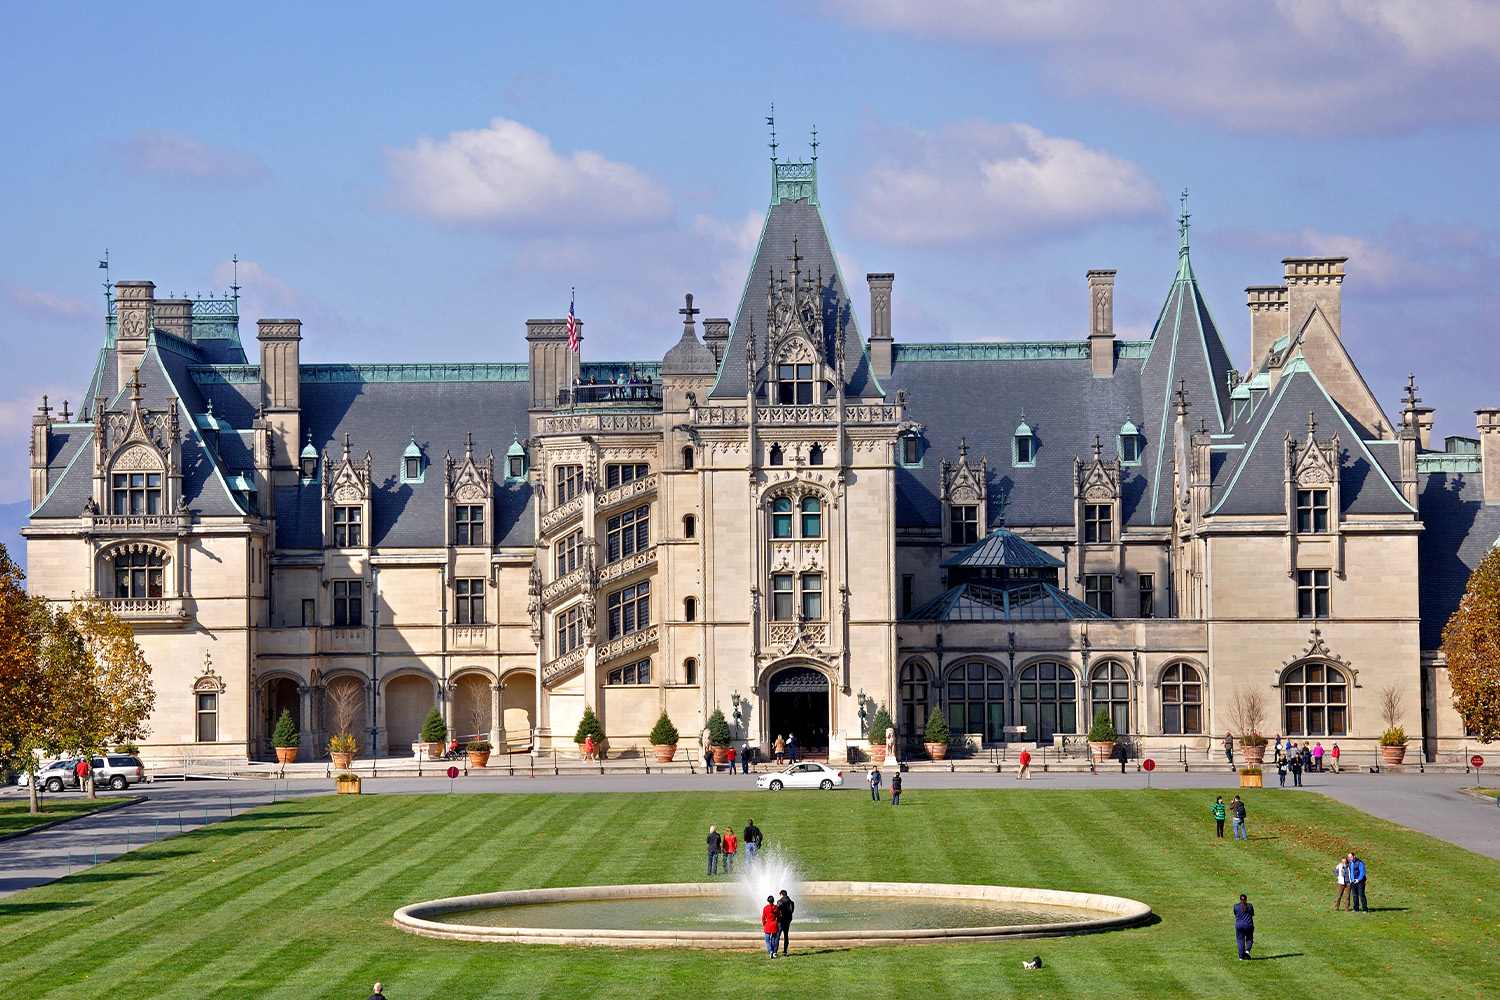 Biltmore Estate in Asheville, North Carolina. 
The self-supporting ceramic tile vault and arch system was used extensively inside and outside of Biltmore, and was patented by Rafael Guastavino, a Spanish architect and engineer who personally supervised the installation.